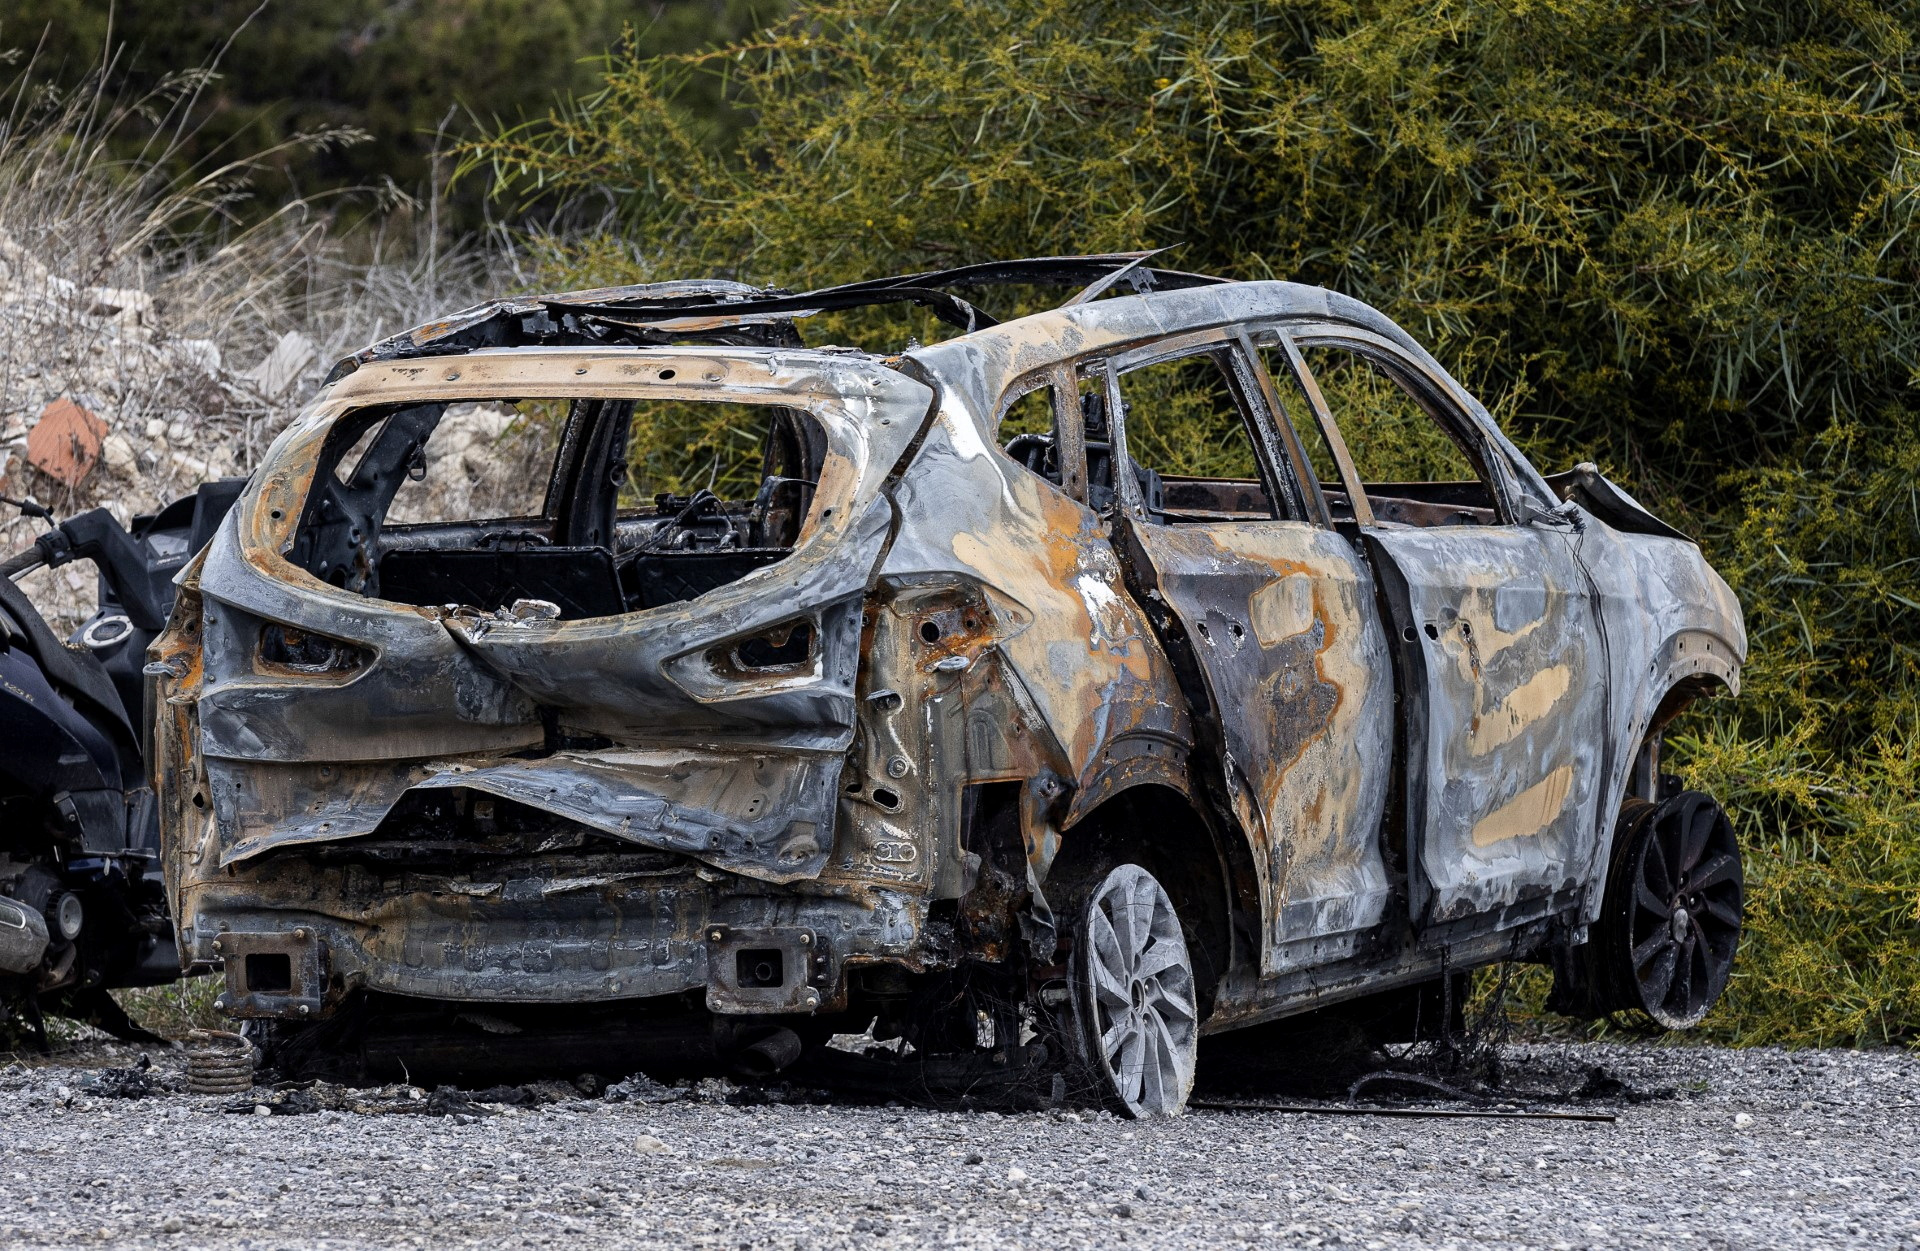 The car his killers allegedly used to flee before setting on fire